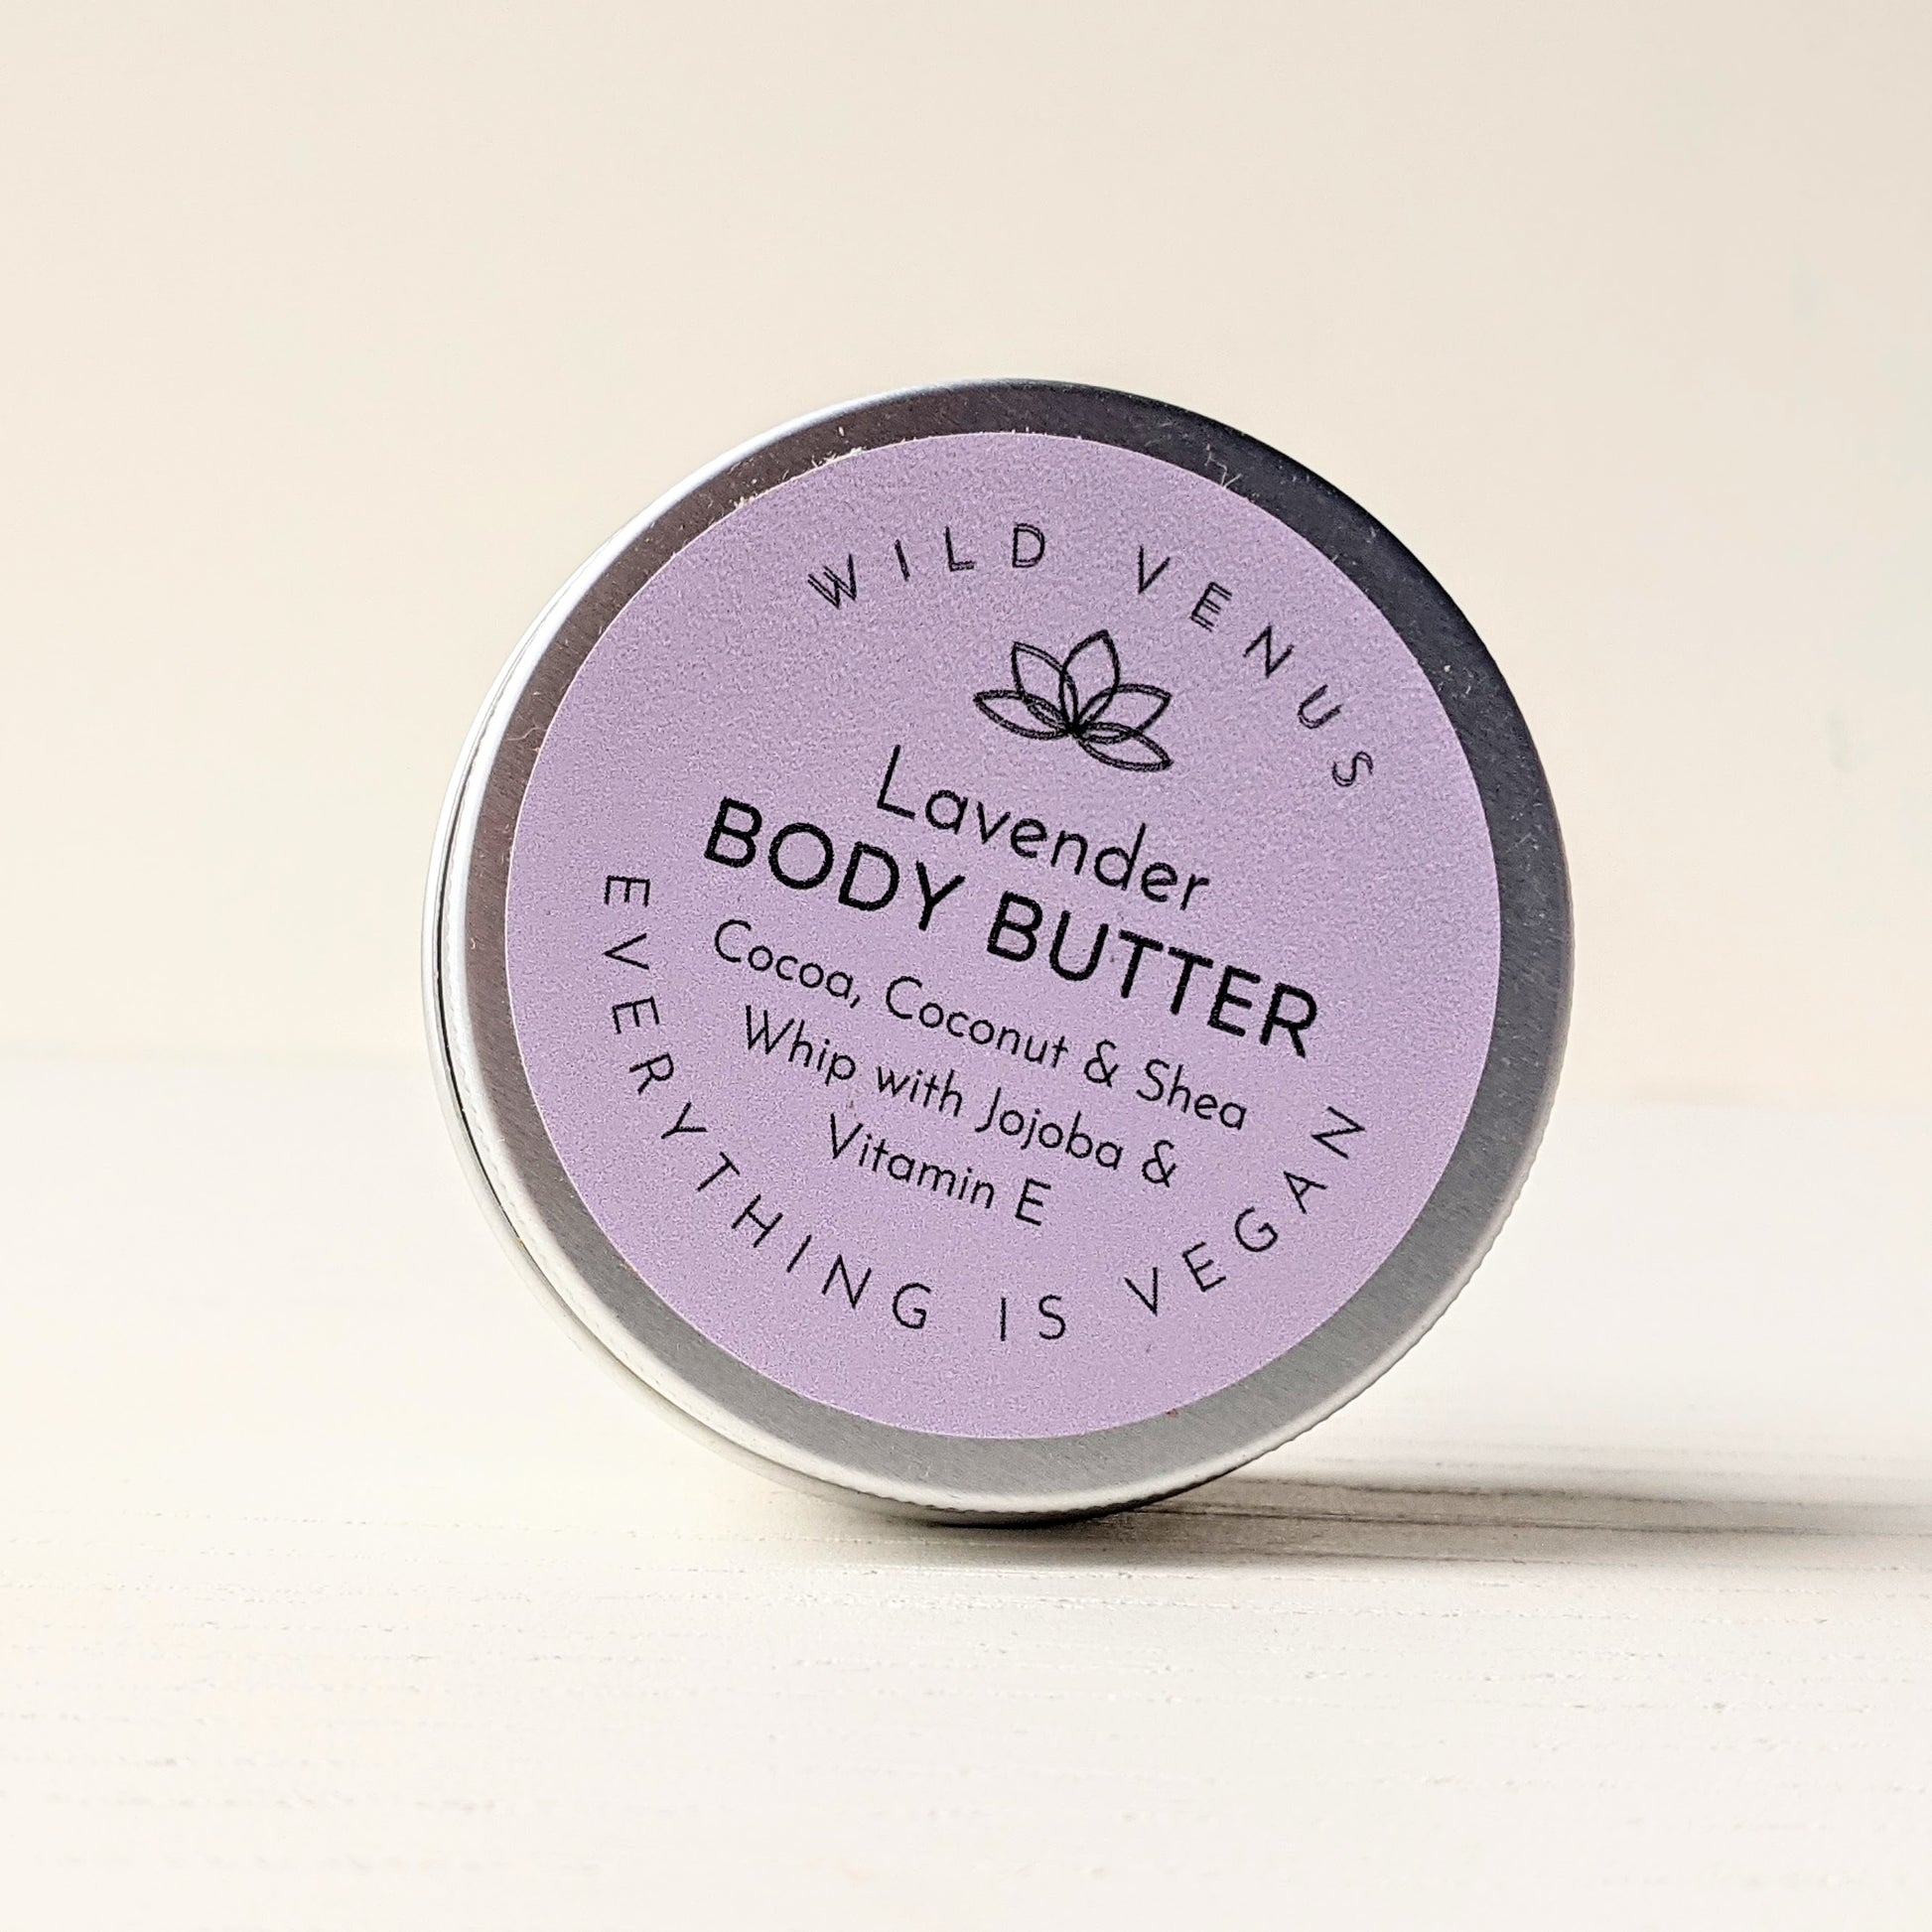 A small tin of lavender body butter